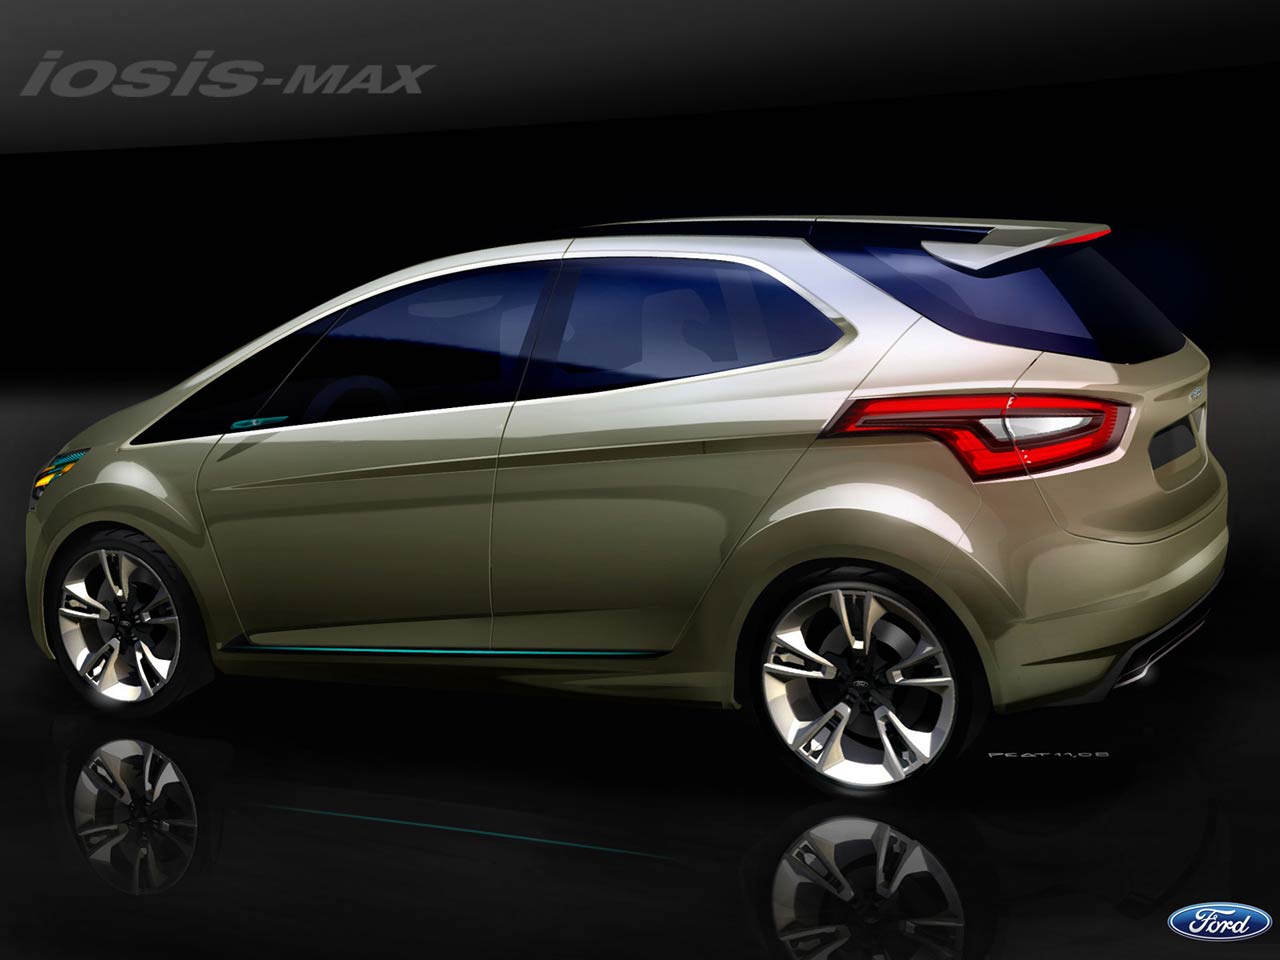 Ford iosis MAX, 2009